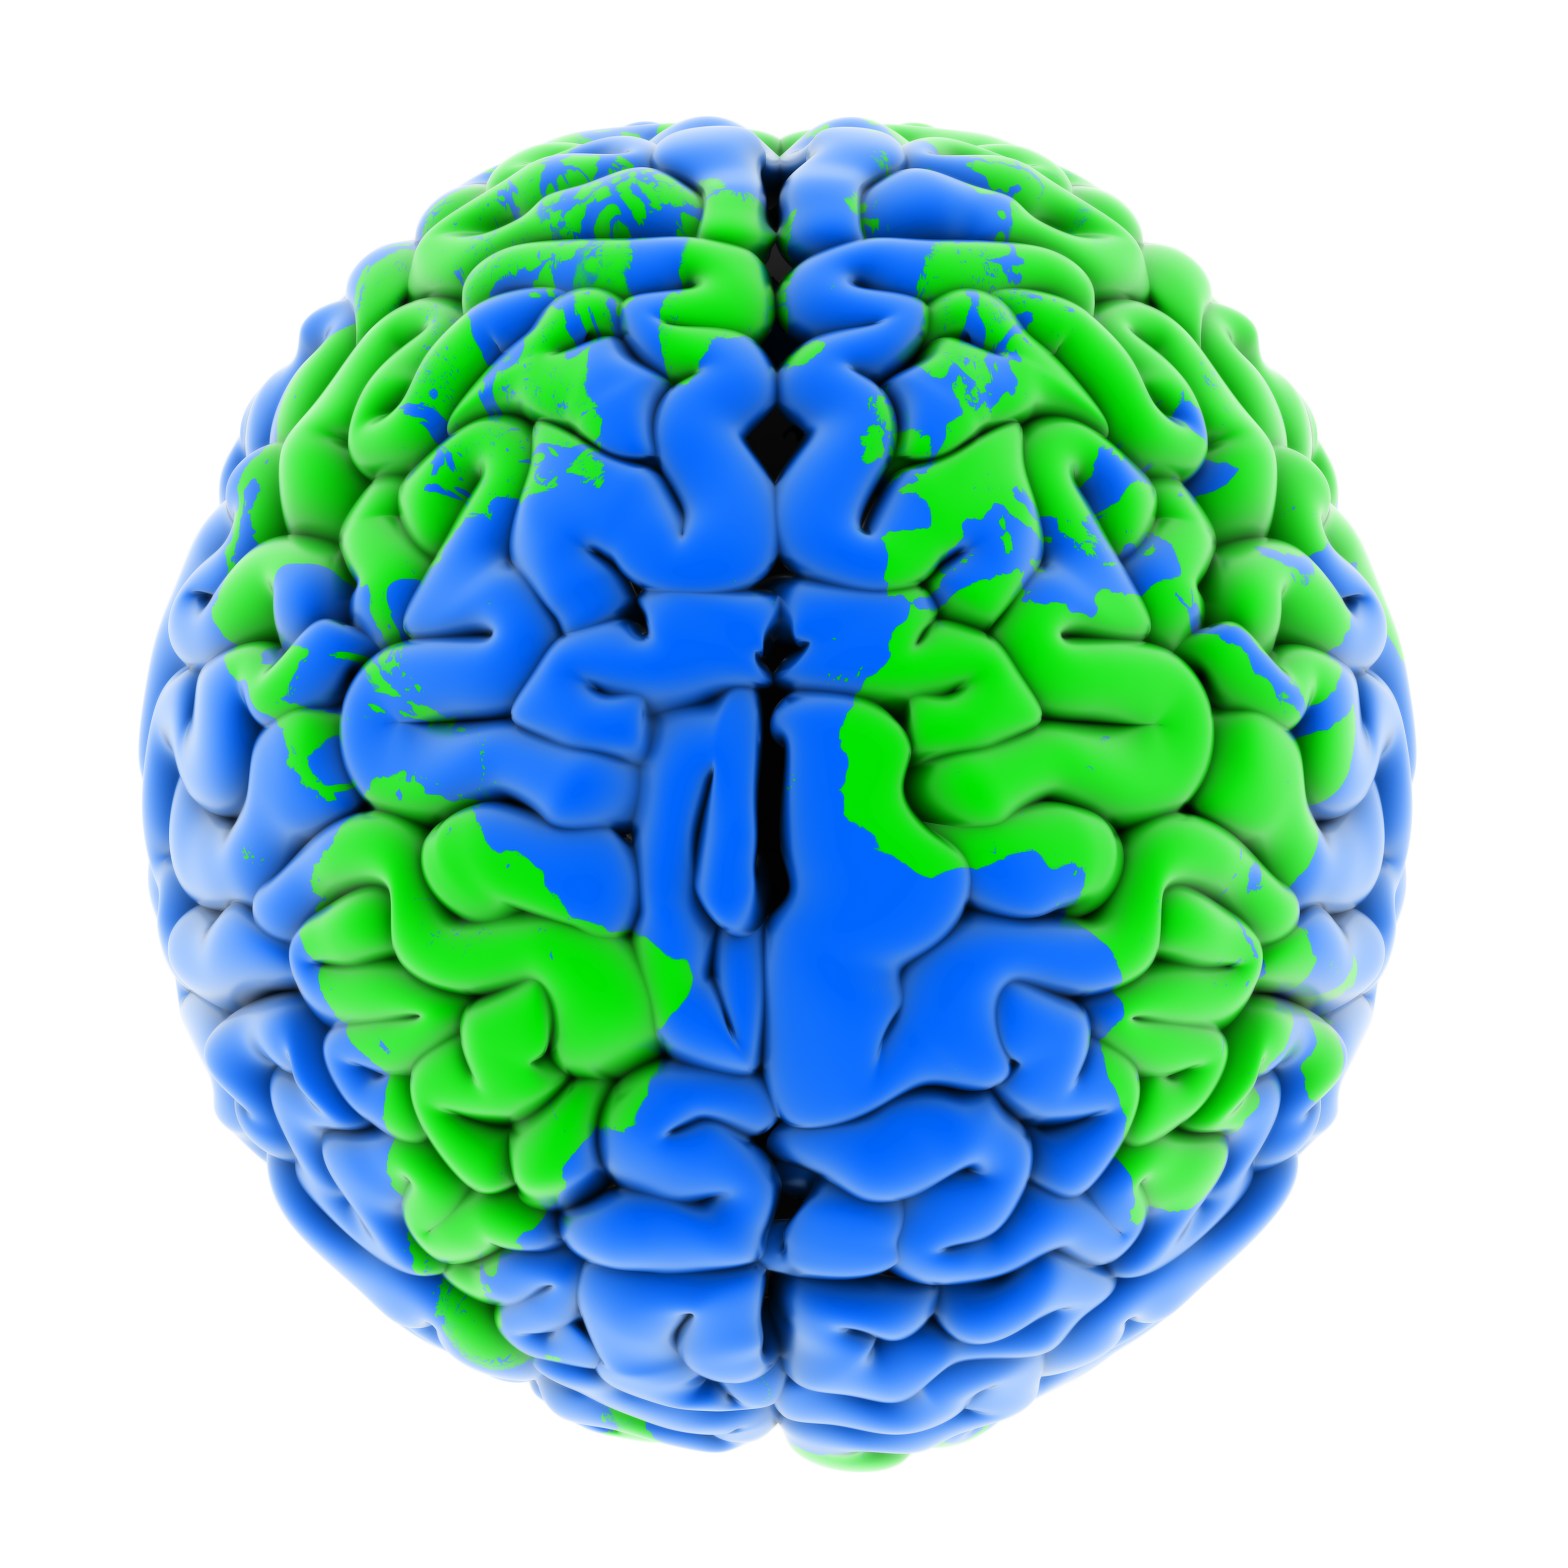 Human brain colored like the earth with blue ocean and green continents